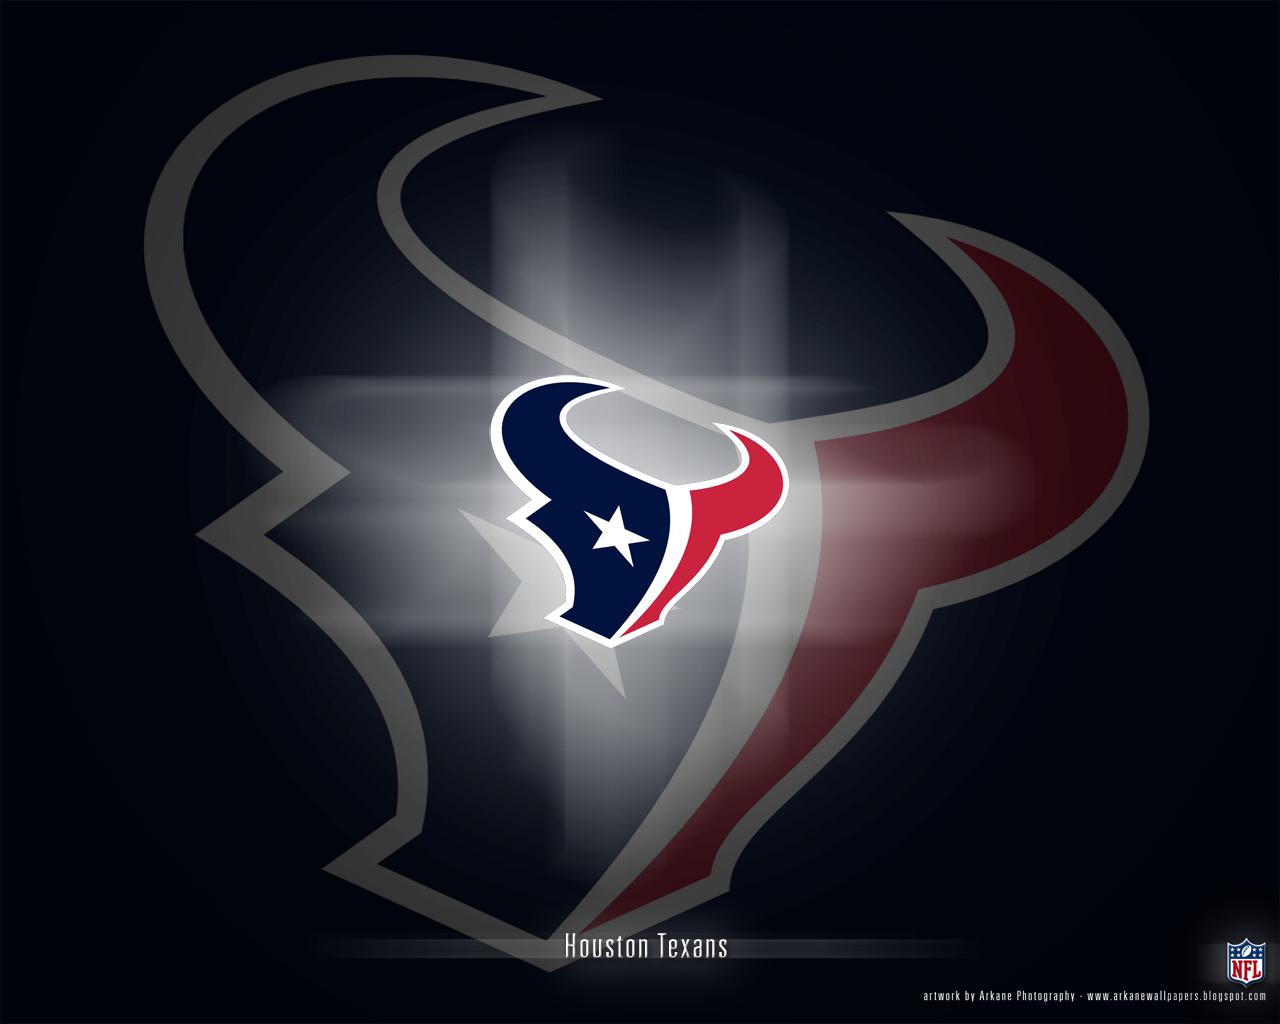 Free clipart image of houston texans